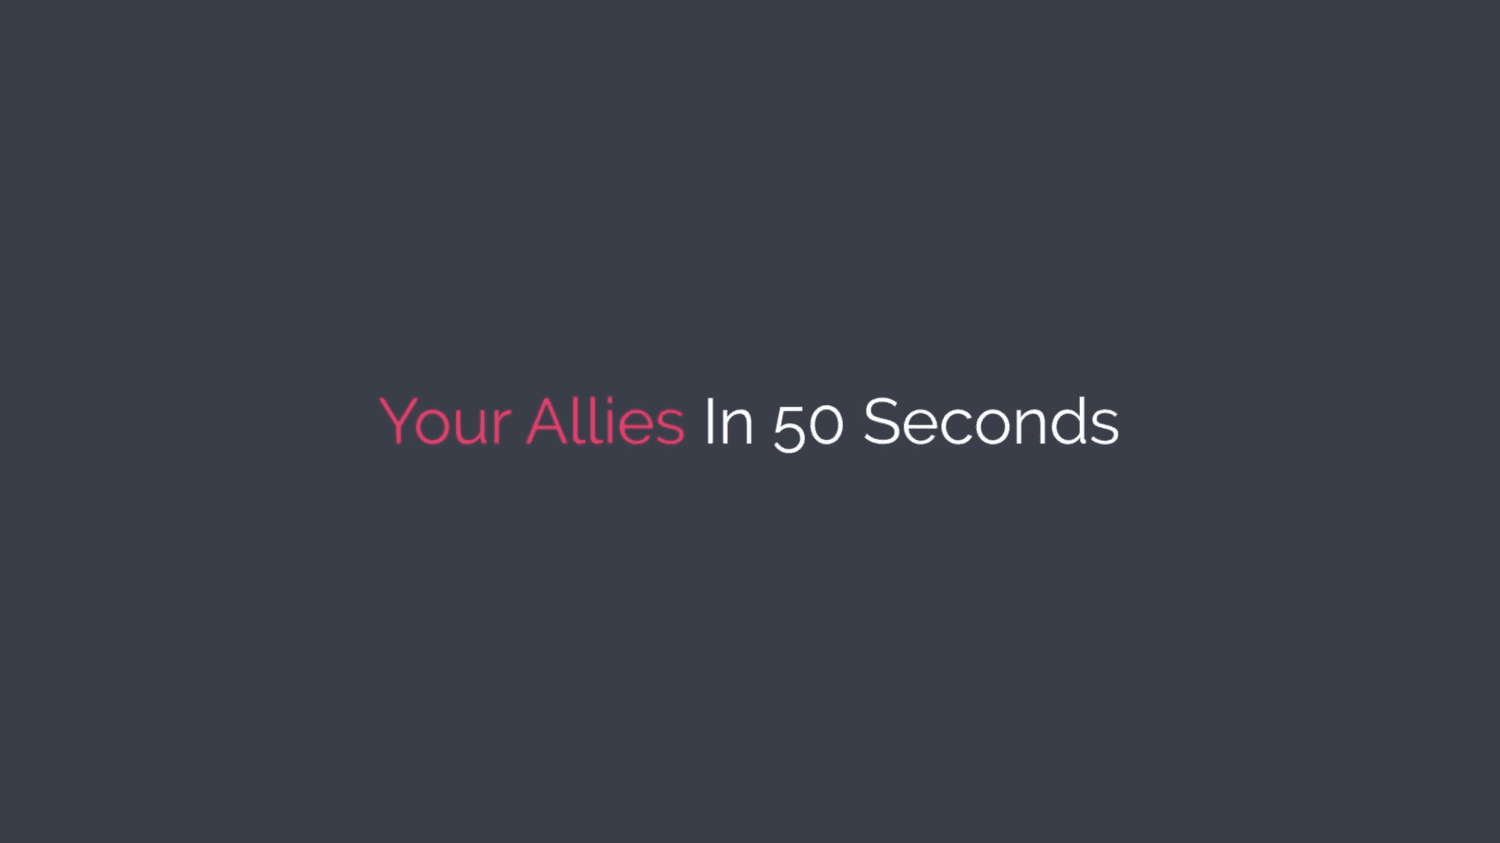 Your Allies - flexible outsourced marketing support